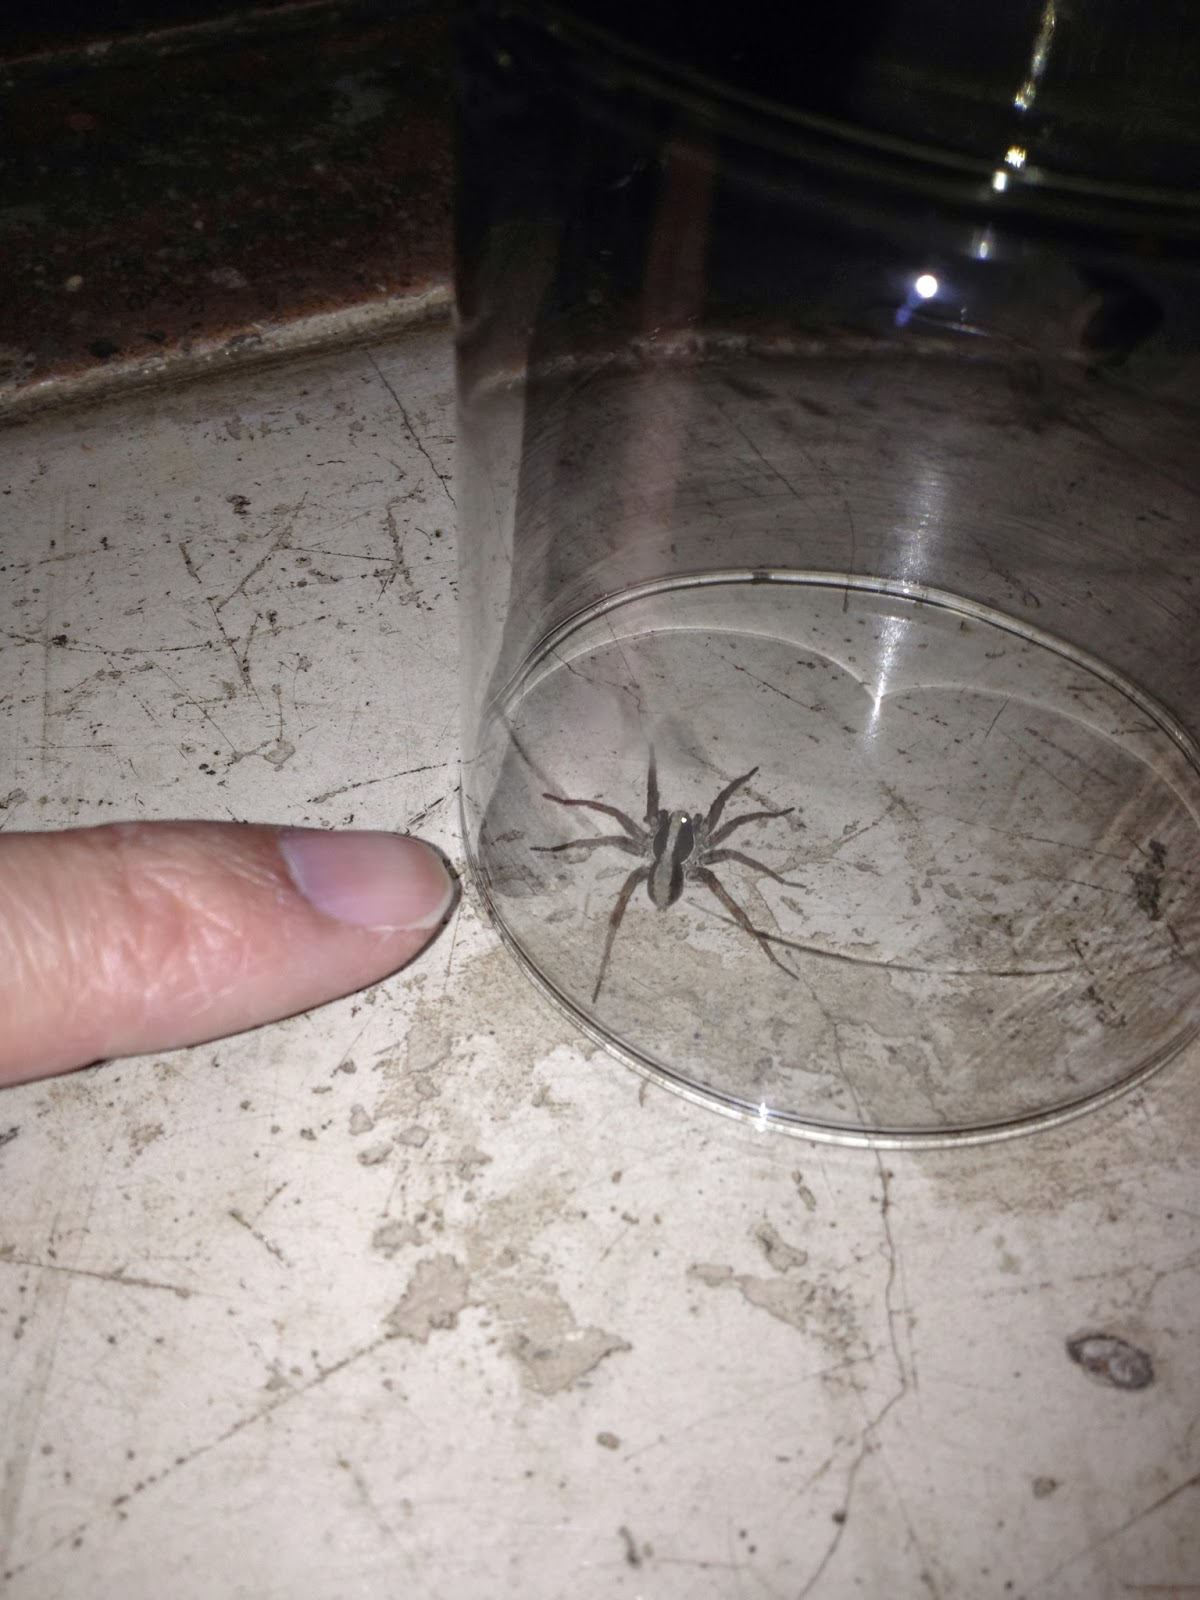 Sabi Sands - We had a perfect evening until this jumping spider crashed our party!